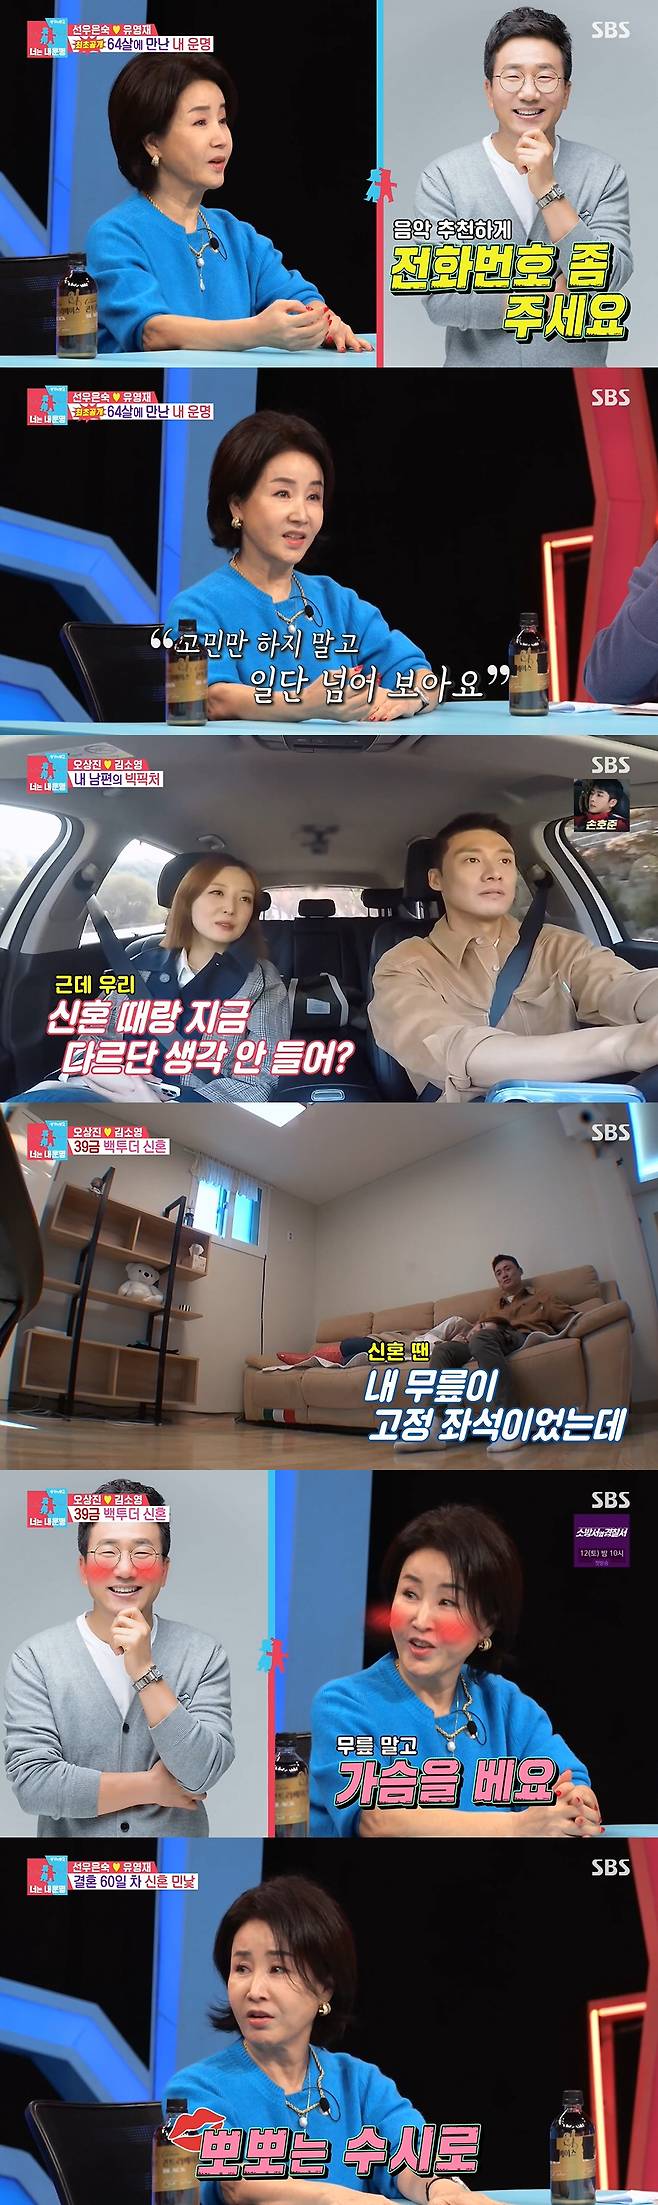 Actor Sun Woo-suk expressed his remarriage with Yoo Yeong-jae, a 4-year-old announcer.Sunwoo Eun-sook appeared as a special MC in the SBS entertainment program Same Bed, Different Dreams 2: You Are My Dest (hereinafter referred to as Same Bed, Different Dreams 2: You Are My Dest), which aired on the 7th.Sun Woo-suk said, I was noisy when I was married and when I broke up. I did not even think about remarriage because I did not want to be mentioned in the media again. But people changed me.I am a little embarrassed at our age, but I am really happy. I didnt meet him on a date. I met him when my close brother called me to a refreshment table. I broke up with him without thinking, and he said, Ill send you a good music, so give me your phone number.The next morning, I sent two music and a message saying, Start a good Haru while listening to this song. I recommended only my favorite songs. I thought I was thinking about me.One time I listened to the song and sent a picture of the bread, and during the live broadcast of the radio, the reply I left mine came right away. As for the background of the promise of marriage at a high speed in eight days, (Yoo Yeong-jae) asked, How long have you been separated? I answered 17 years. He said, Trust me because you are a decent person.If a hurdler hesitates in front of the hurdles, he will not be able to run and will fall behind, he said. I have to look at it from the other side. Sun Woo-suk added, If I have a debt, I do not care.I do not care if I have a debt of A billion, I do not care if I have to pay my debts instead. I do not have a divorce twice in my dictionary. Kim So-young and Oh Sang-jins Haru were released. On their way to a trip, Kim So-young told Oh Sang-jin, Do not you think its different now?Oh Sang-jin said, Its our honeymoon from today.I will reset it from today and drag it for another five years. After seeing this scene, Sunwoo Eun-sook said, Husband naturally touches.We do not have much time left, so I love you a lot and Im sorry if you do not express a lot. Oh Sang-jin and Kim So-young arrived at the hostel and started to watch the movie, but they sat down a little apart and laughed. Oh Sang-jin did not do much better than Kim So-young.Sunwoo Eun-sook asked, Have you tried a knee pillow? And said, I do not kneel but my chest.Oh Sang-jin bought buttercups, octopus, sashimi, and eel, which are good for energy and energy, and laughed at Kim So-young, saying, Do you want to wrestle today? Kim So-young said, I can not afford this energy.Kim So-young said, Actually, I keep thinking about my daughter.Even when I was watching TV, I could not concentrate. Oh Sang-jin said casually, Did you tell SuA that you might have a second one? Kim So-young said, Now we do not have time to look at each other, but if we have another child, we will end up with childcare later.Oh Sang-jin said, Lets try harder today. Lets kiss Haru three times.Seo White showed up at Ji Chun Hees fashion show, one of the top fashion designers in Korea.Lee Hyun-yi, who accompanied him, took a look at the white posture and took a one-shot shot.Lim Chang-jung said, (West White) said that standing on the runway was So One. So One has been achieved. Soon after, West White showed calm and confident Woking on the runway.